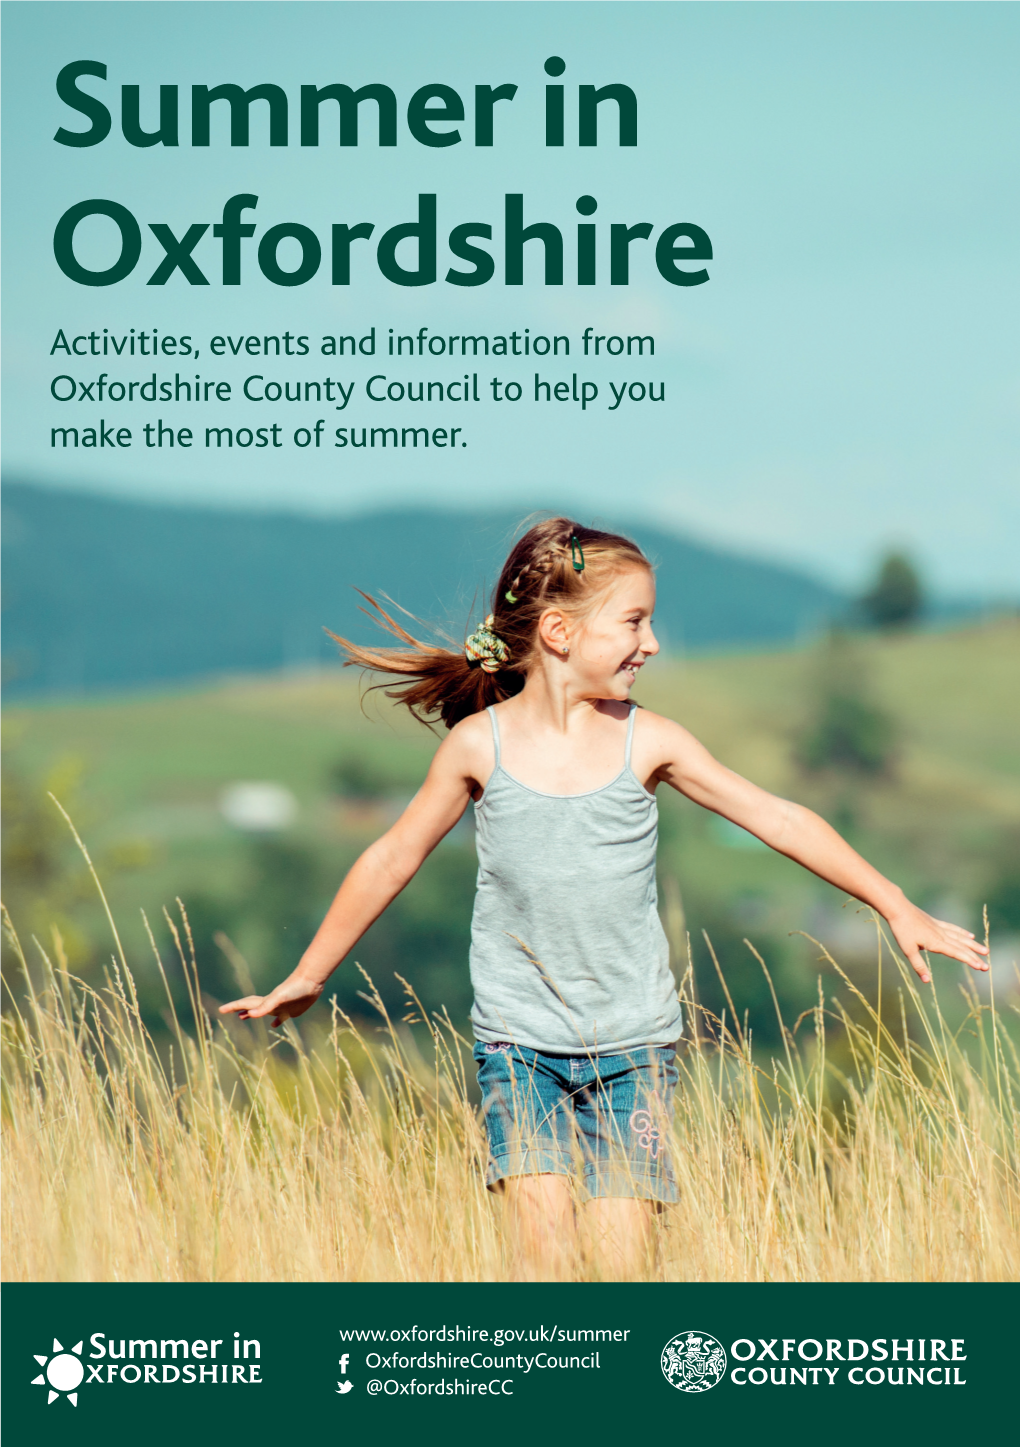 Summer in Oxfordshire Activities, Events and Information from Oxfordshire County Council to Help You Make the Most of Summer